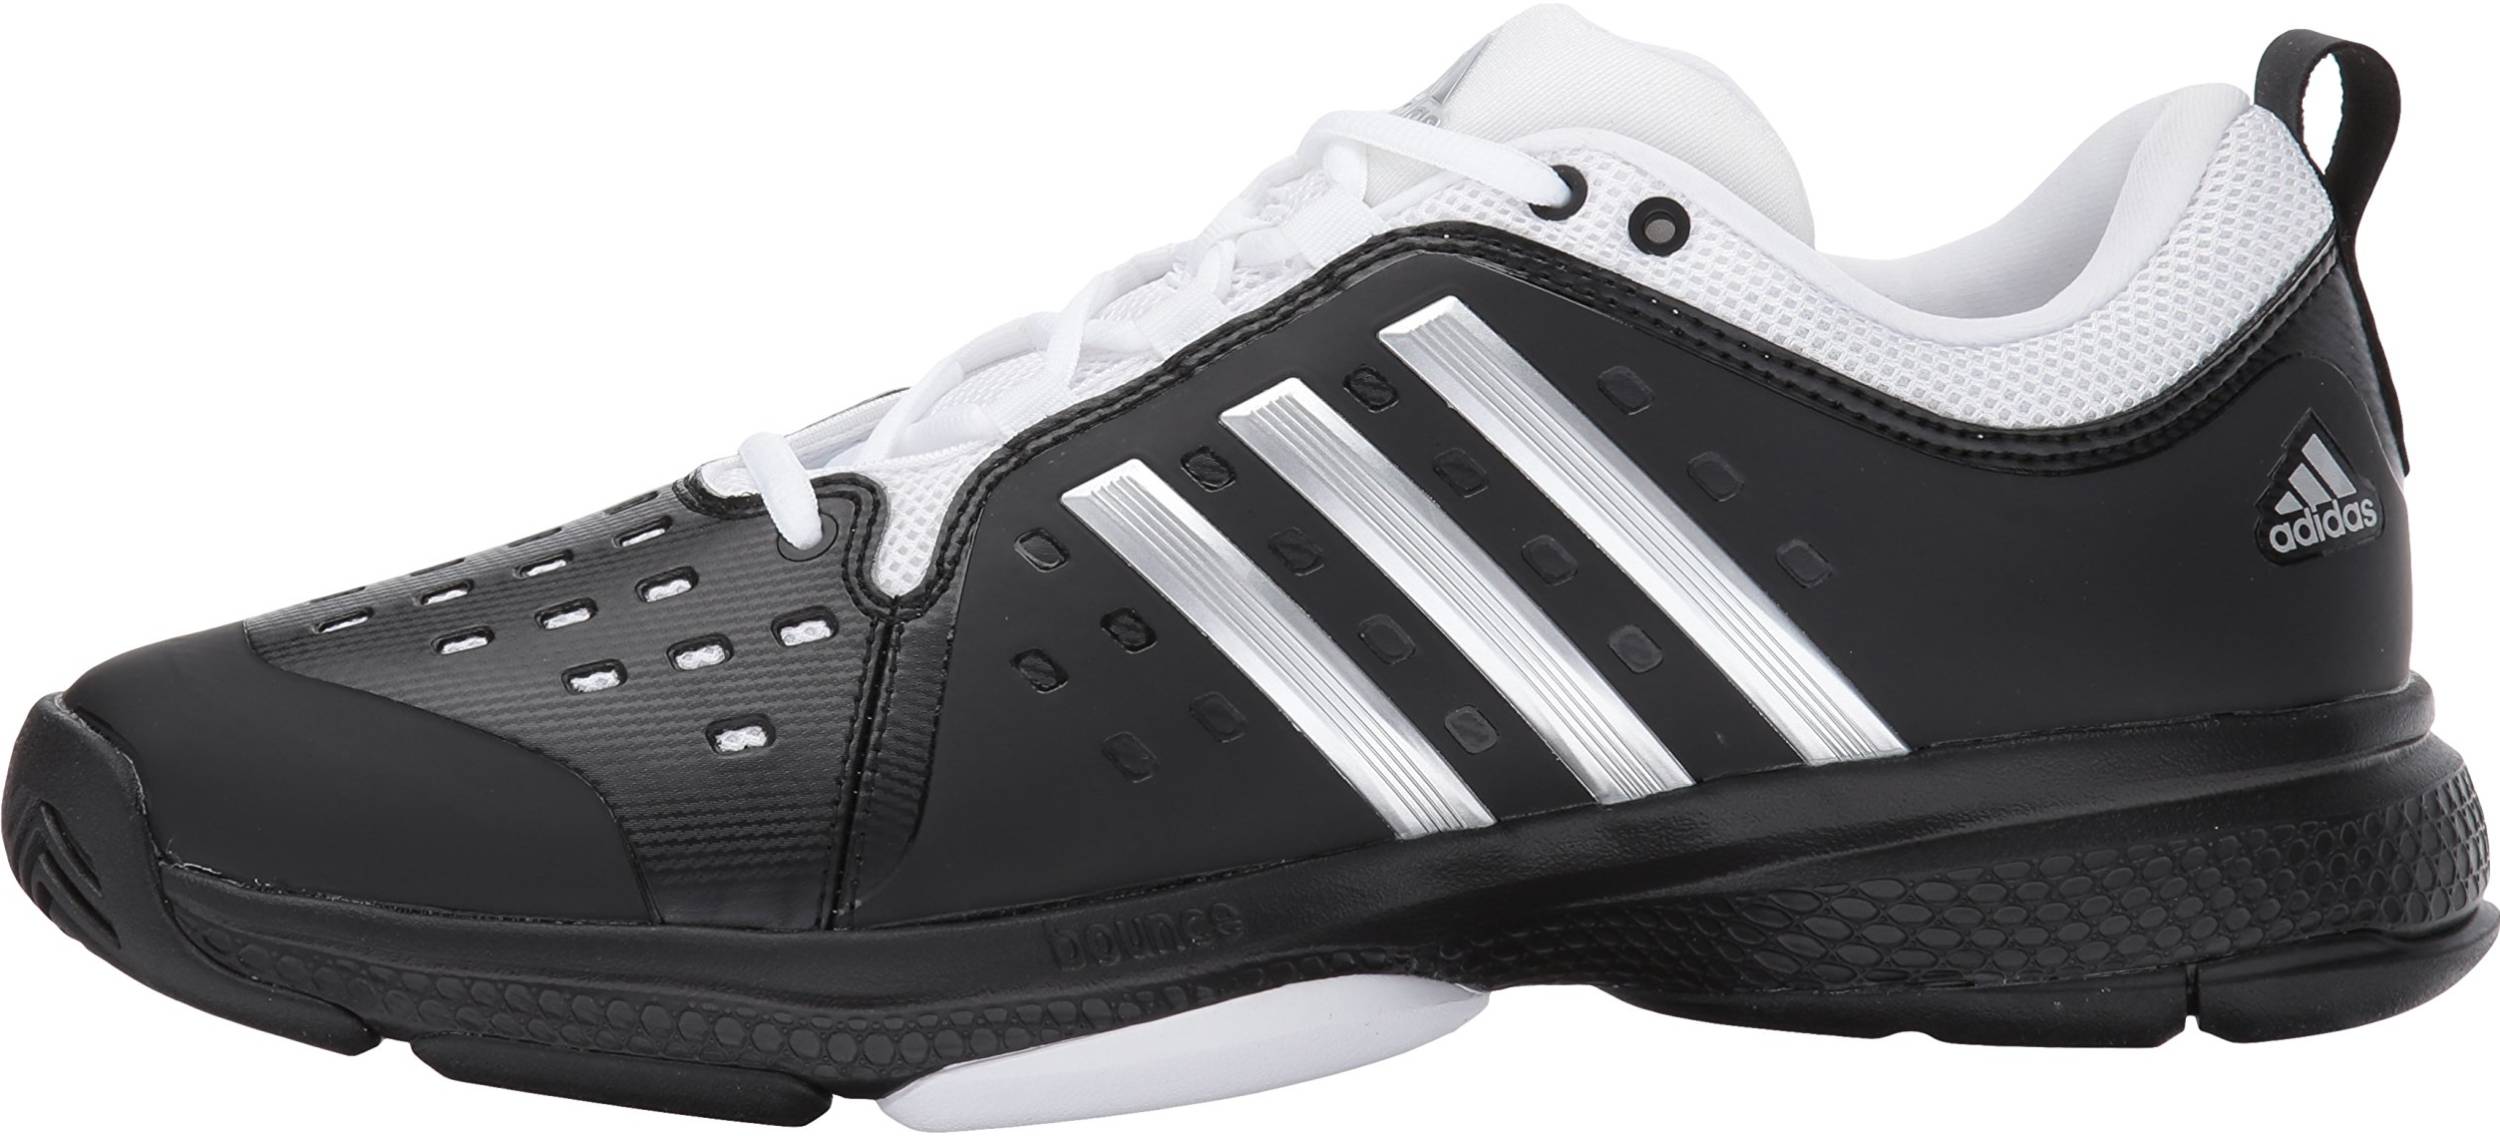 best adidas shoes for tennis